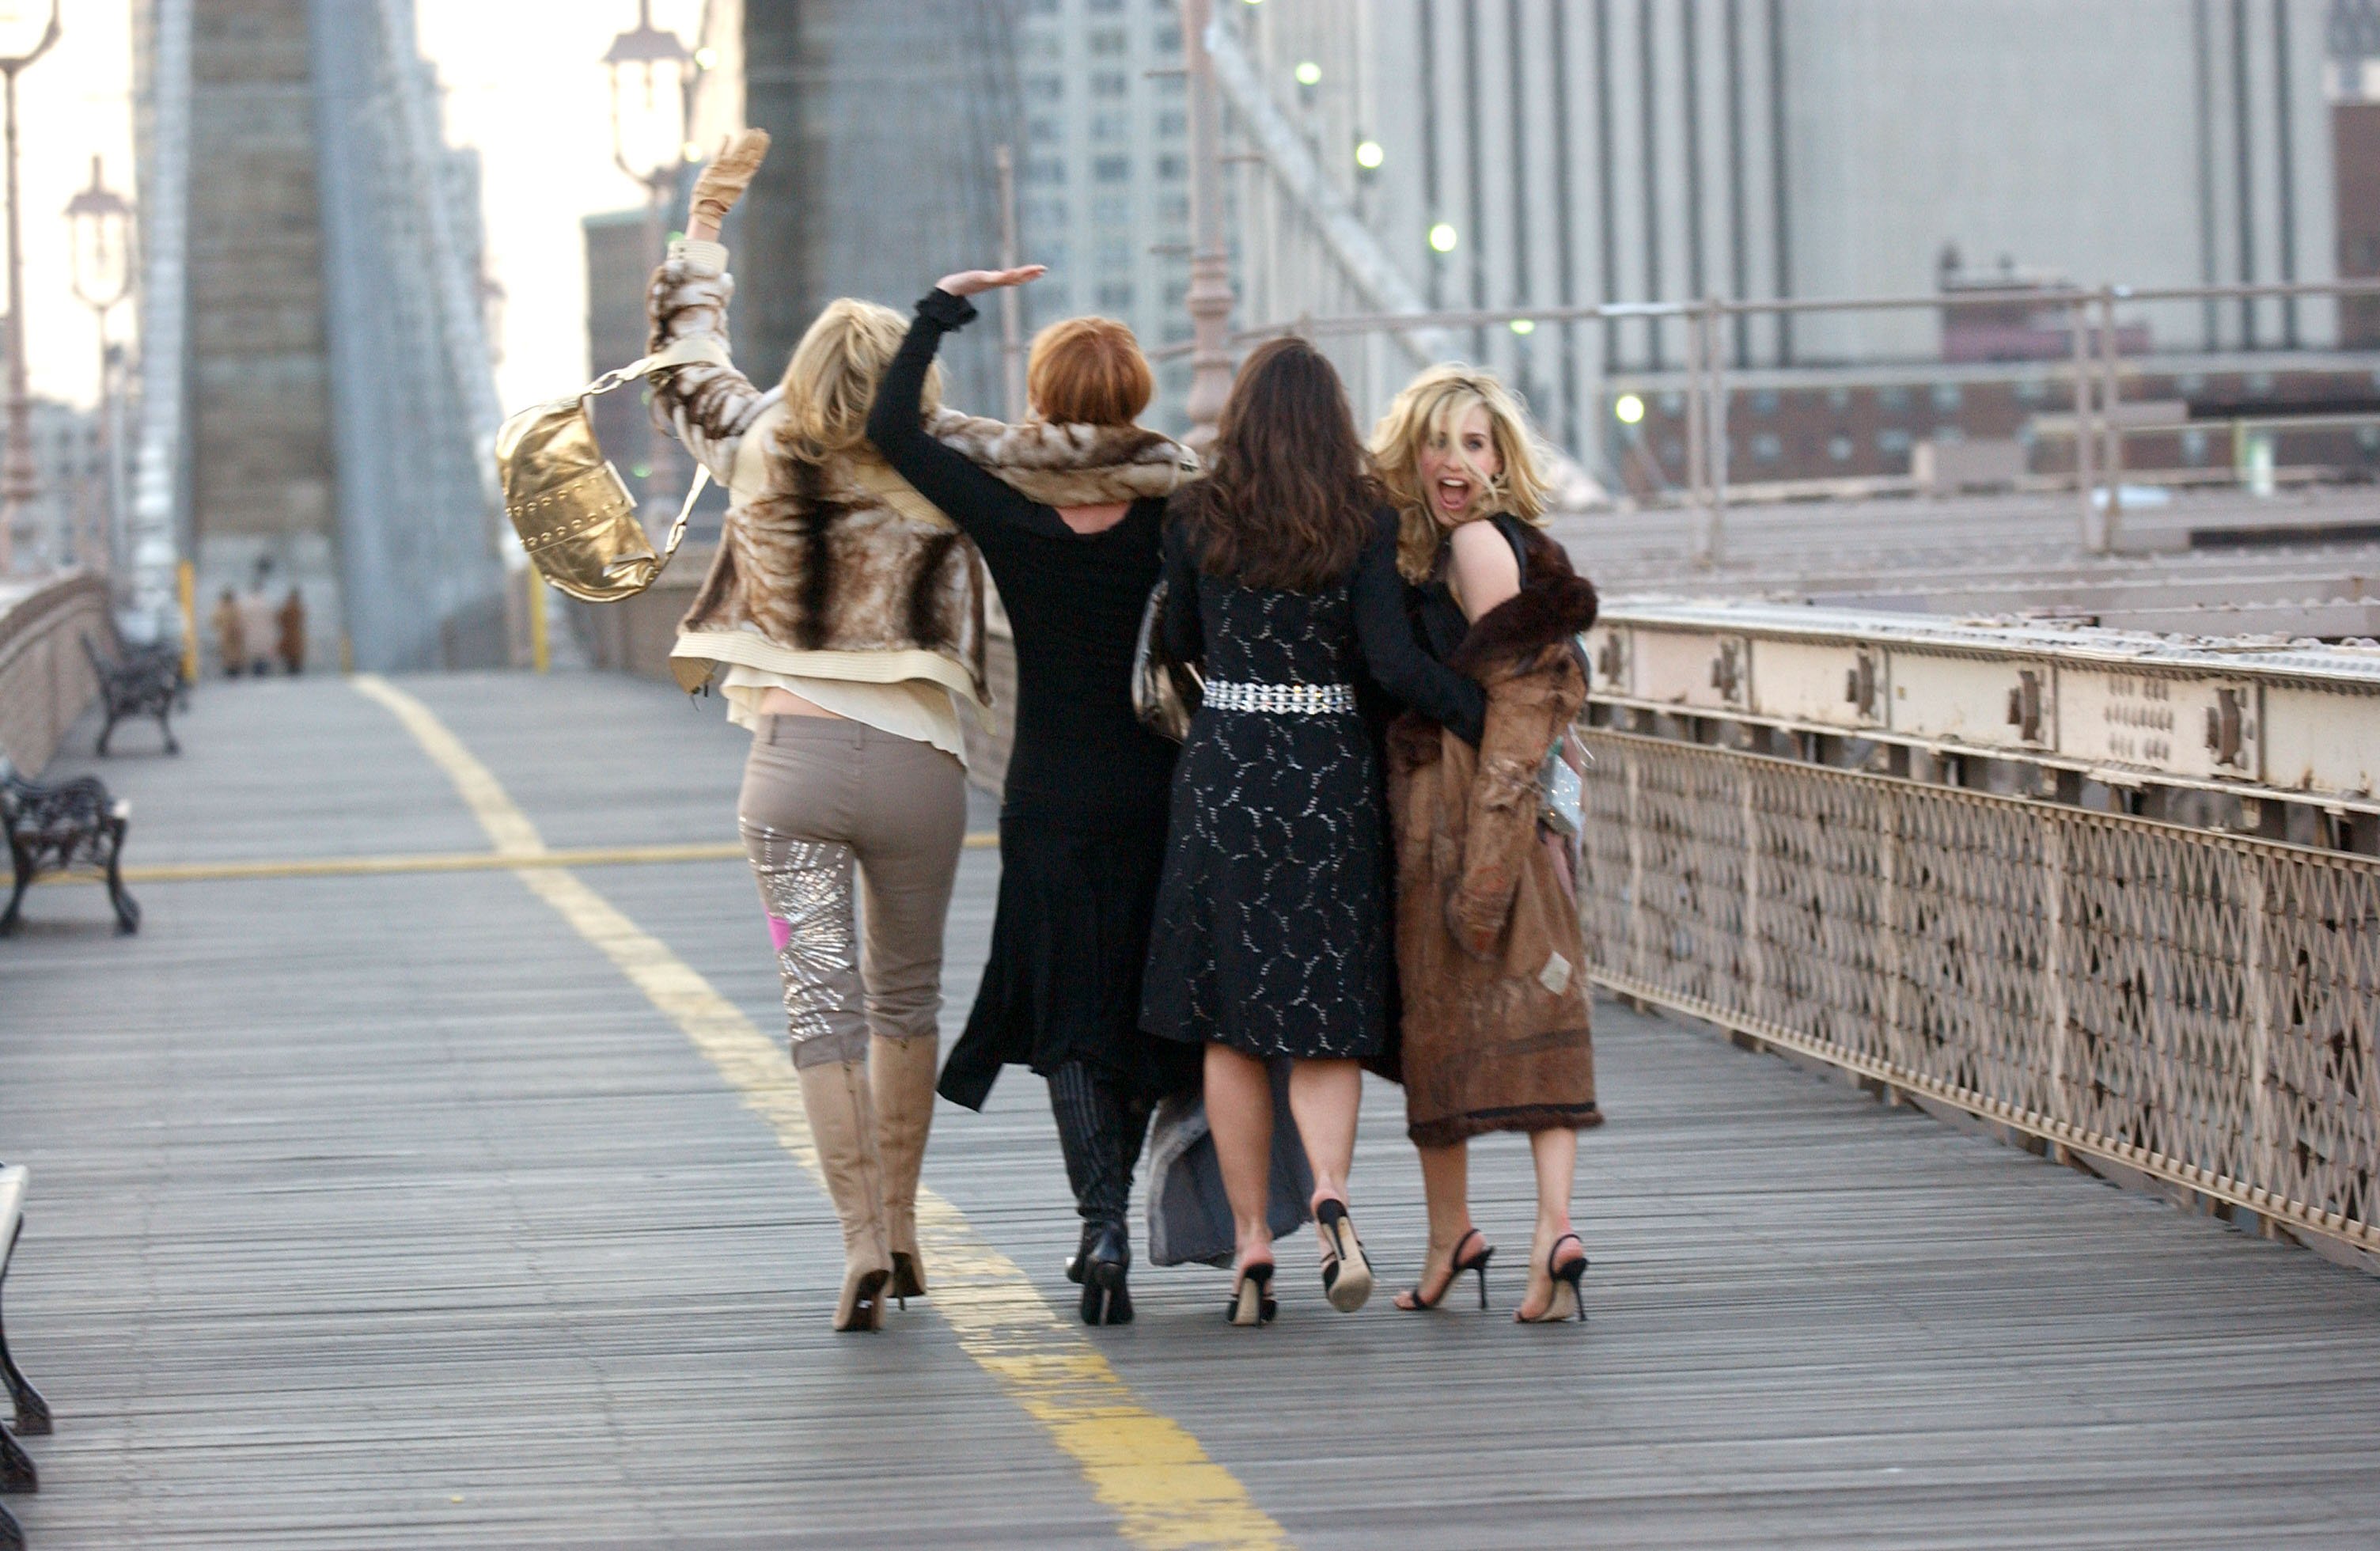 Kim Cattrall, Sarah Jessica Parker, Cynthia Nixon and Kristin Davis walk across the Brooklyn Briddge in promotional photos for 'Sex and the City'